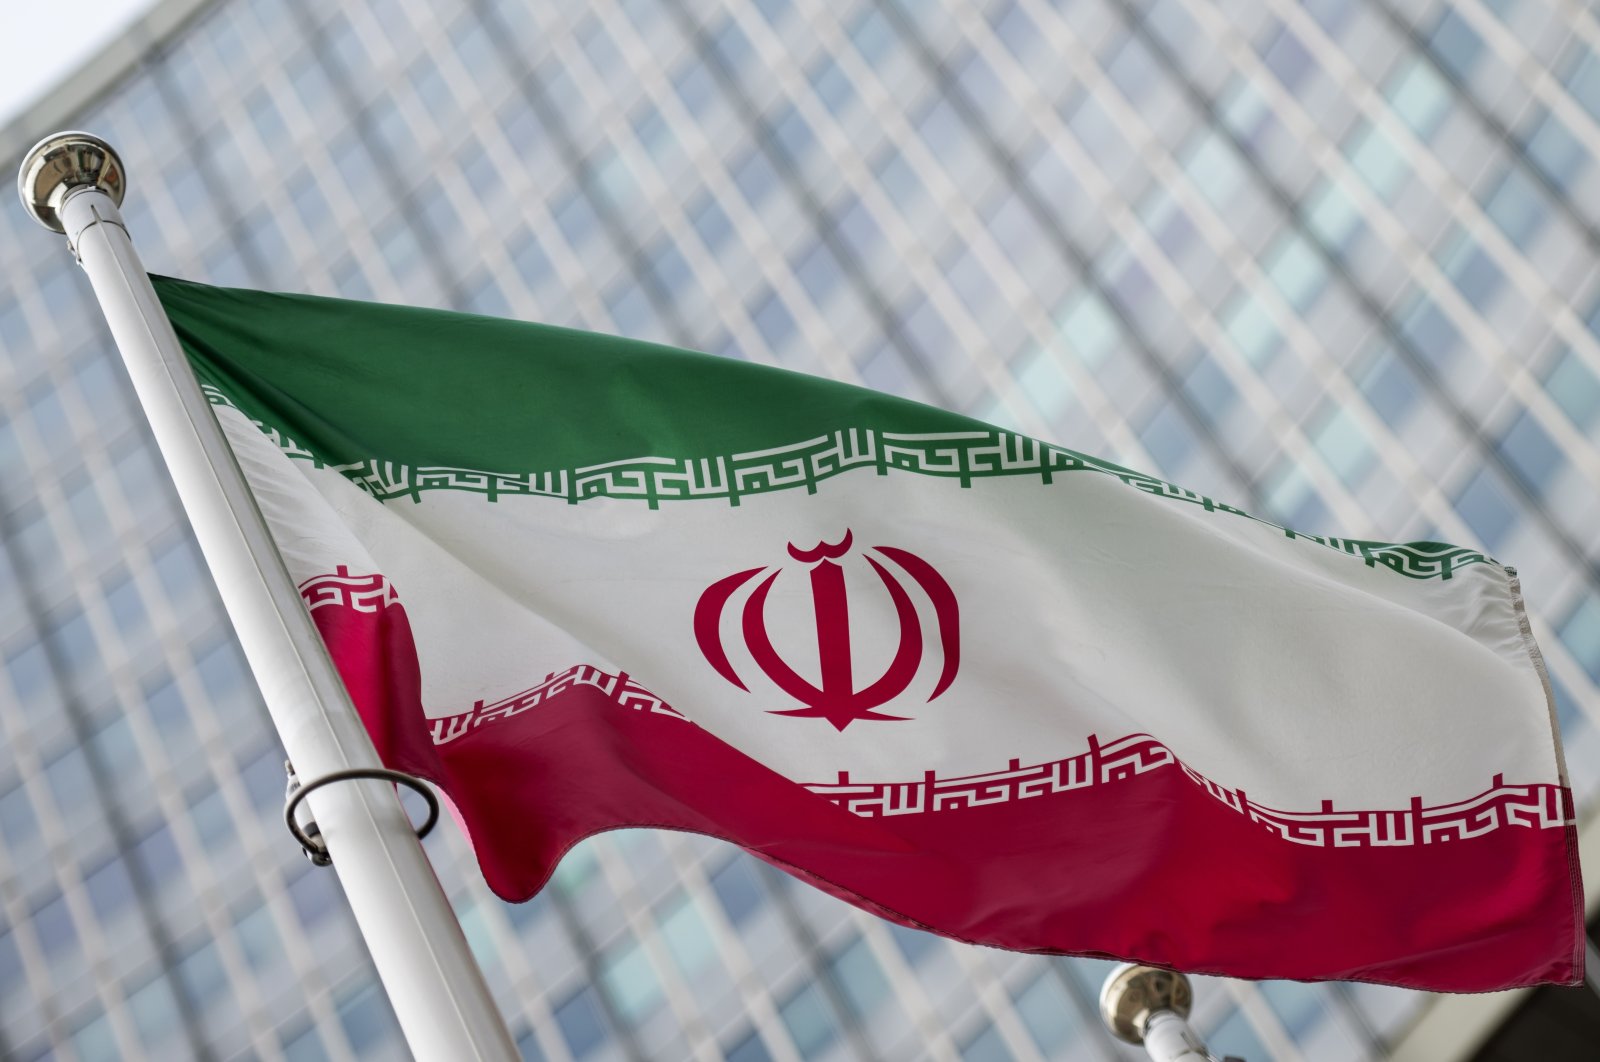 A flag of Iran flies in front of the International Atomic Energy Agency (IAEA) headquarters during a Board of Governors meeting at the IAEA headquarters of the UN seat in Vienna, Austria, March 6, 2023. (EPA Photo)